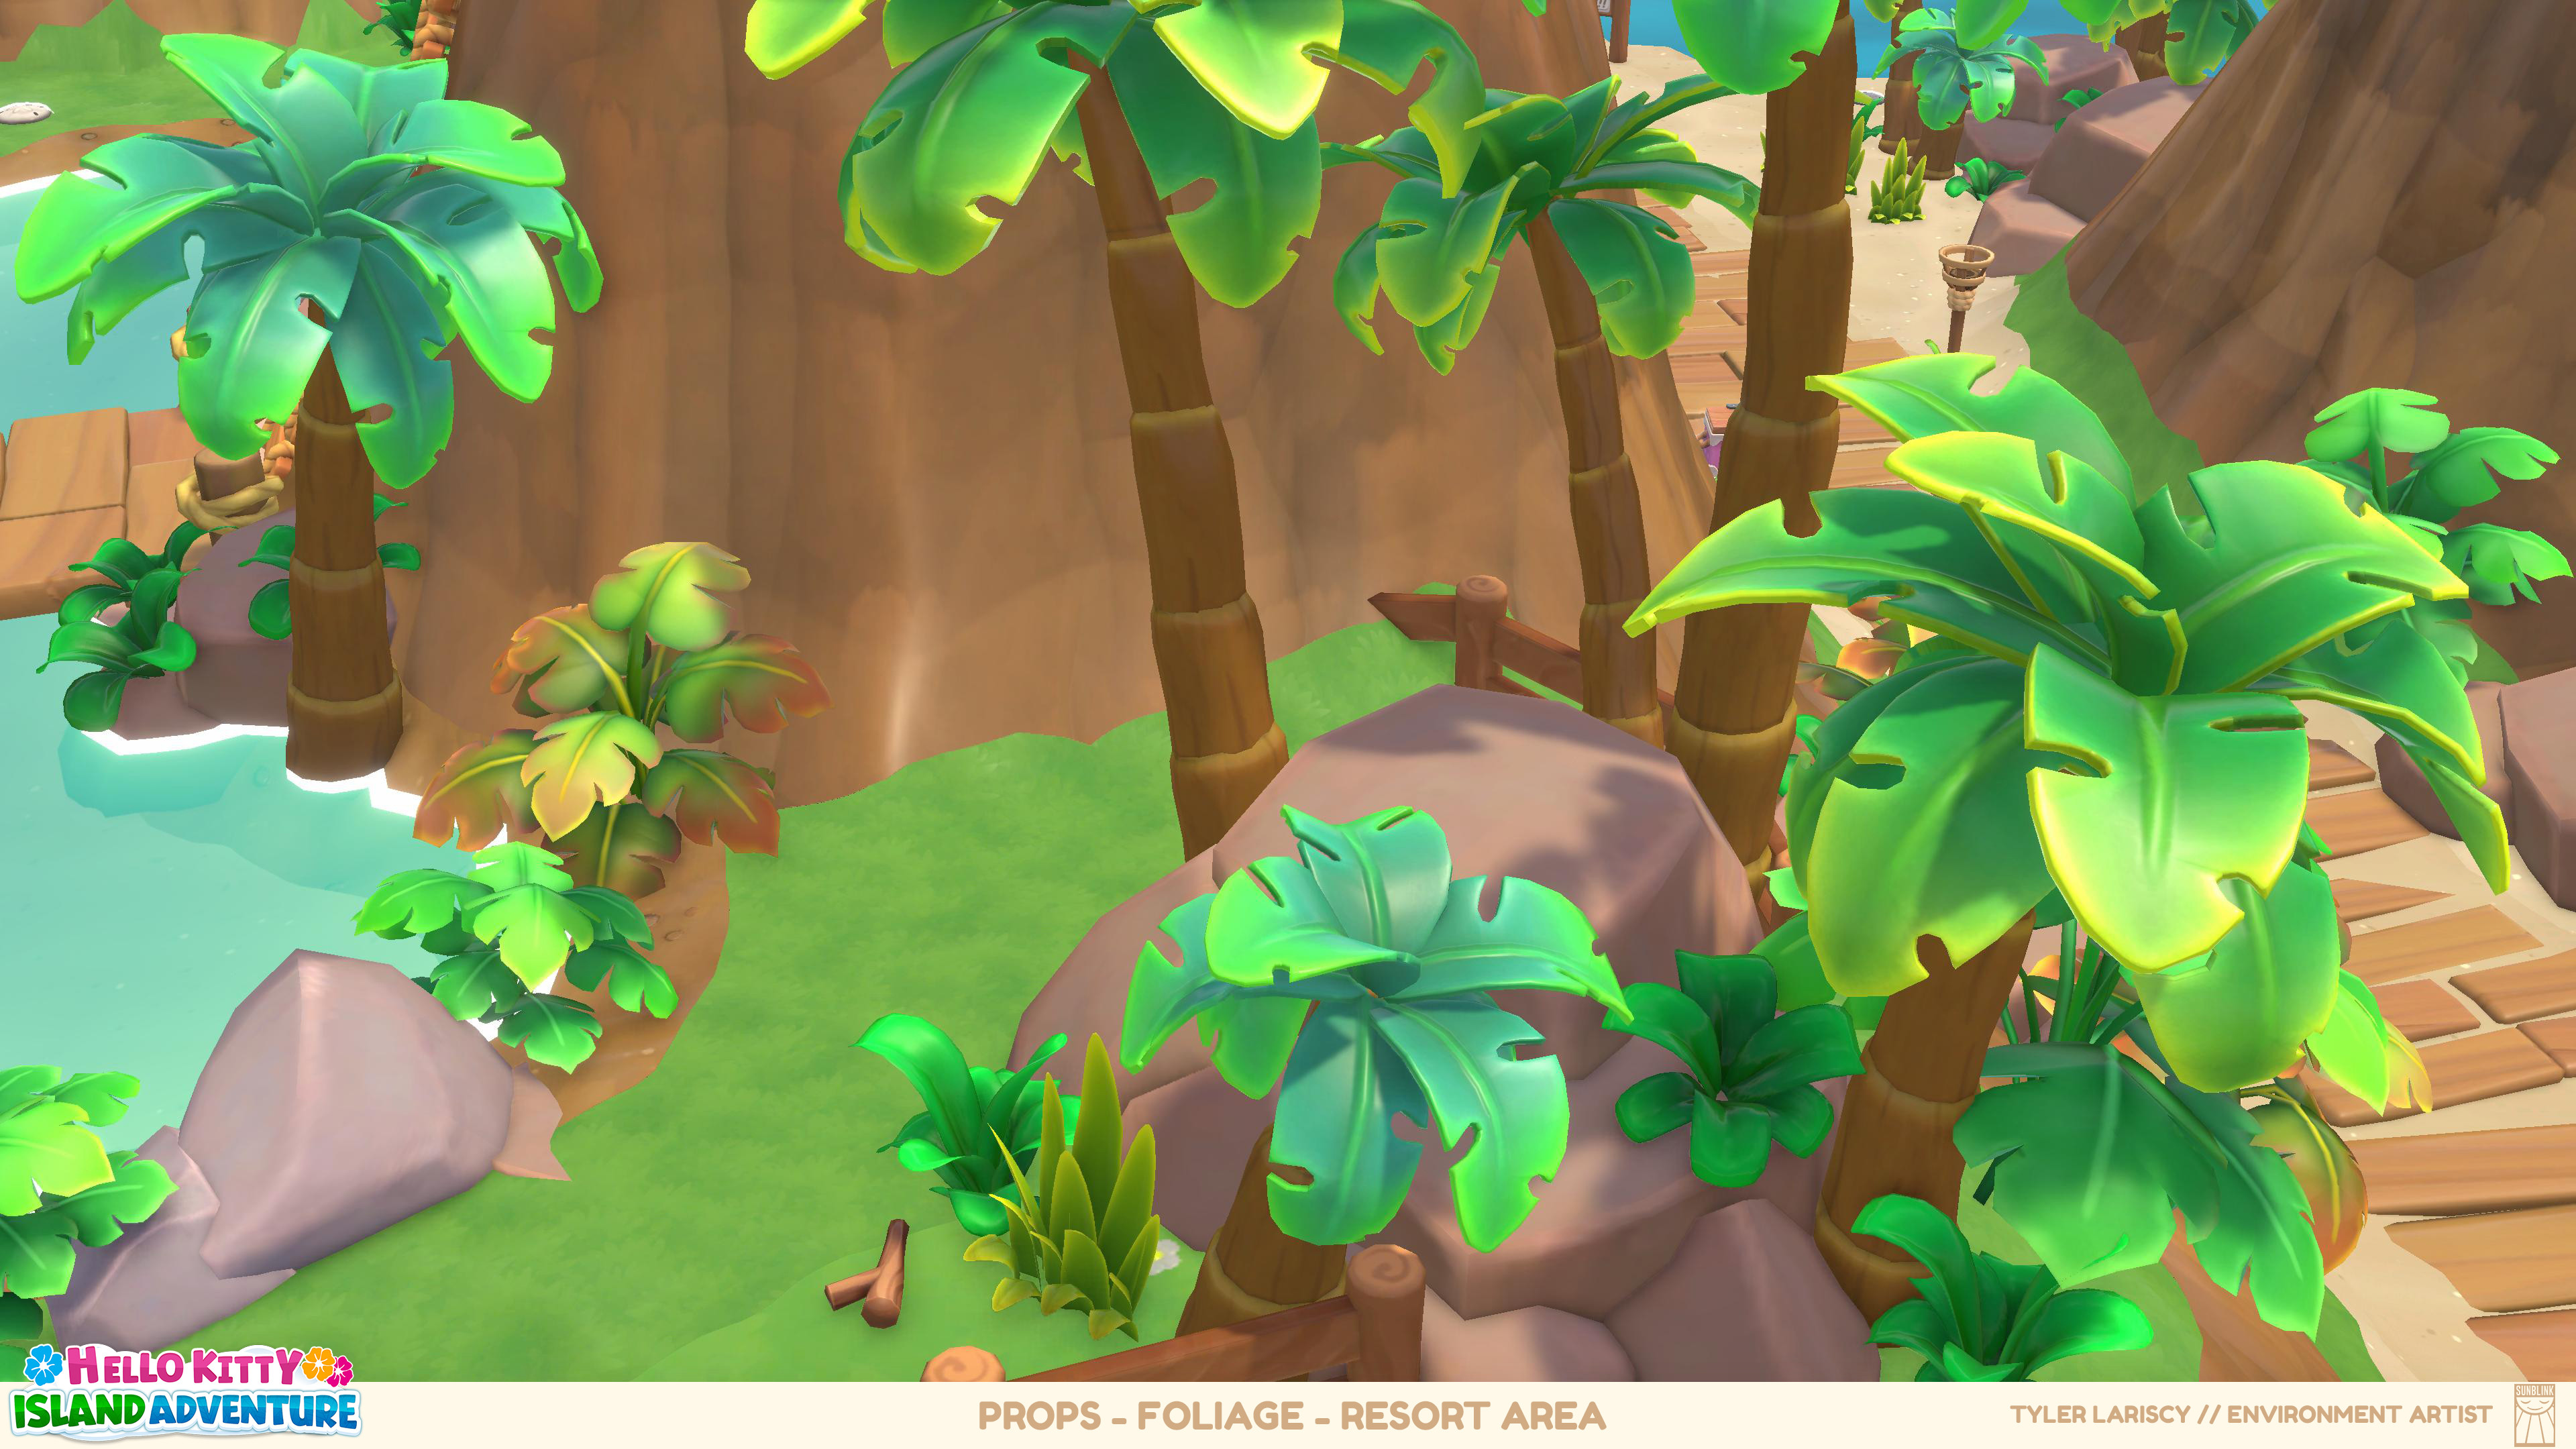 Tropical foliage created for the resort area of the game.